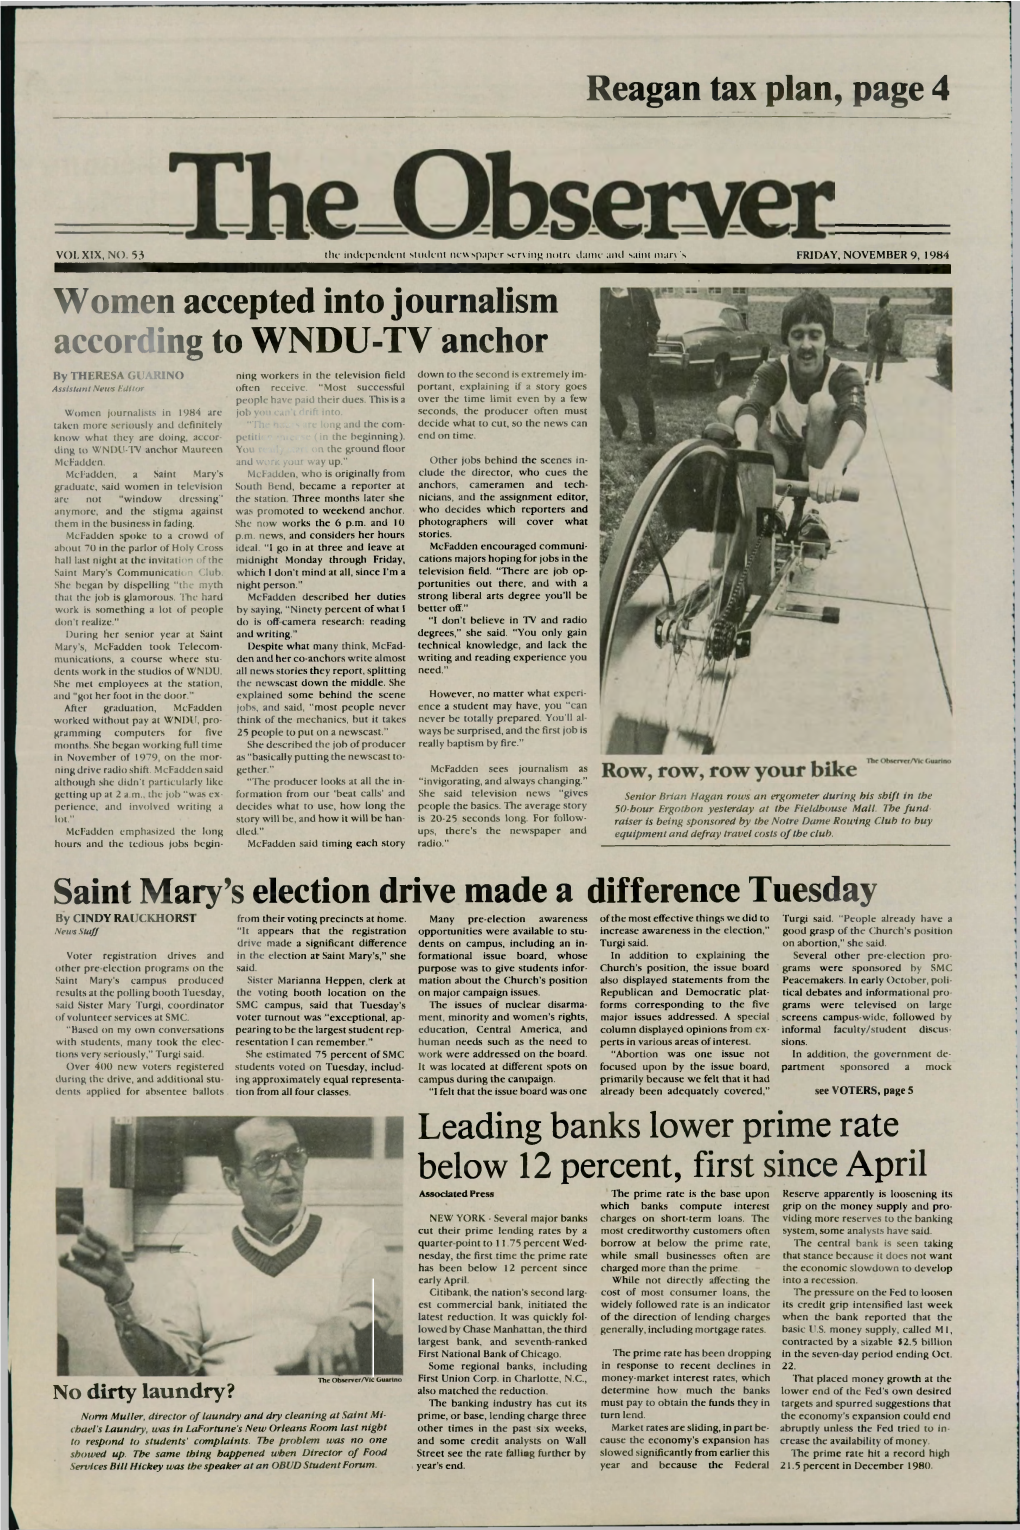 Reagan Tax Plan, Page 4 Women Accepted Into Journalism According to WNDU-TV Anchor Saint Mary's Election Drive Made a Differen